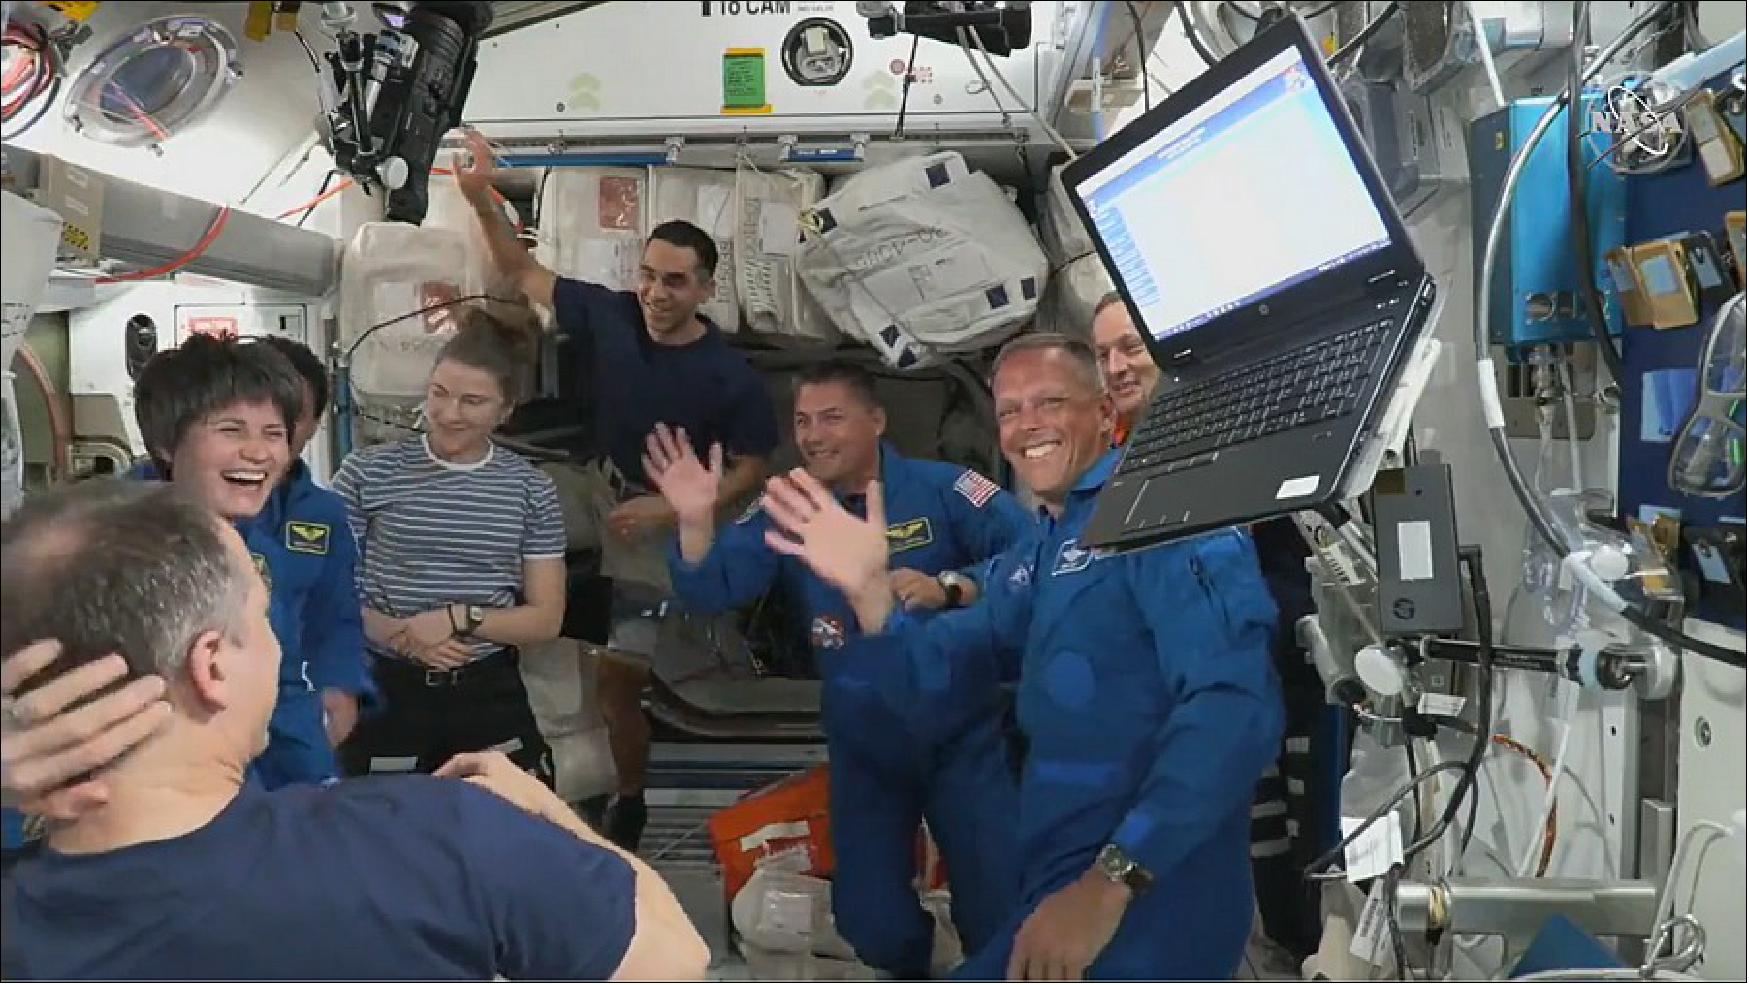 Figure 24: Crew-4 NASA astronauts Mission Commander Kjell Lindgren, Pilot Bob Hines, and Mission Specialist Jessica Watkins, and Mission Specialist Samantha Cristoforetti of ESA (European Space Agency) were greeted by Crew-3 as they arrived to the International Space Station (image credit: NASA TV)